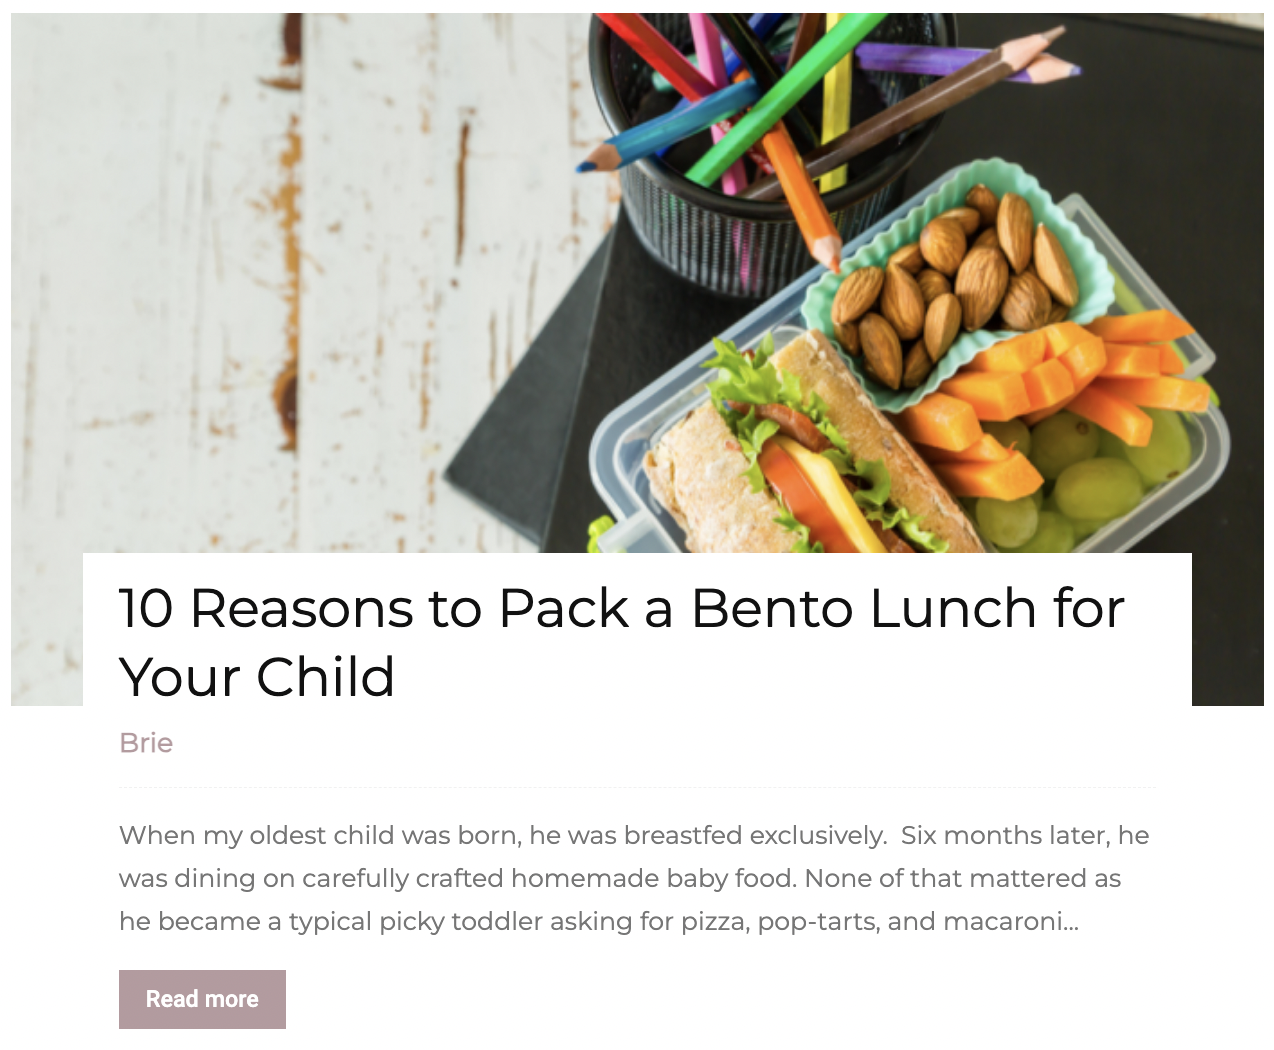 Bento Lunch Article